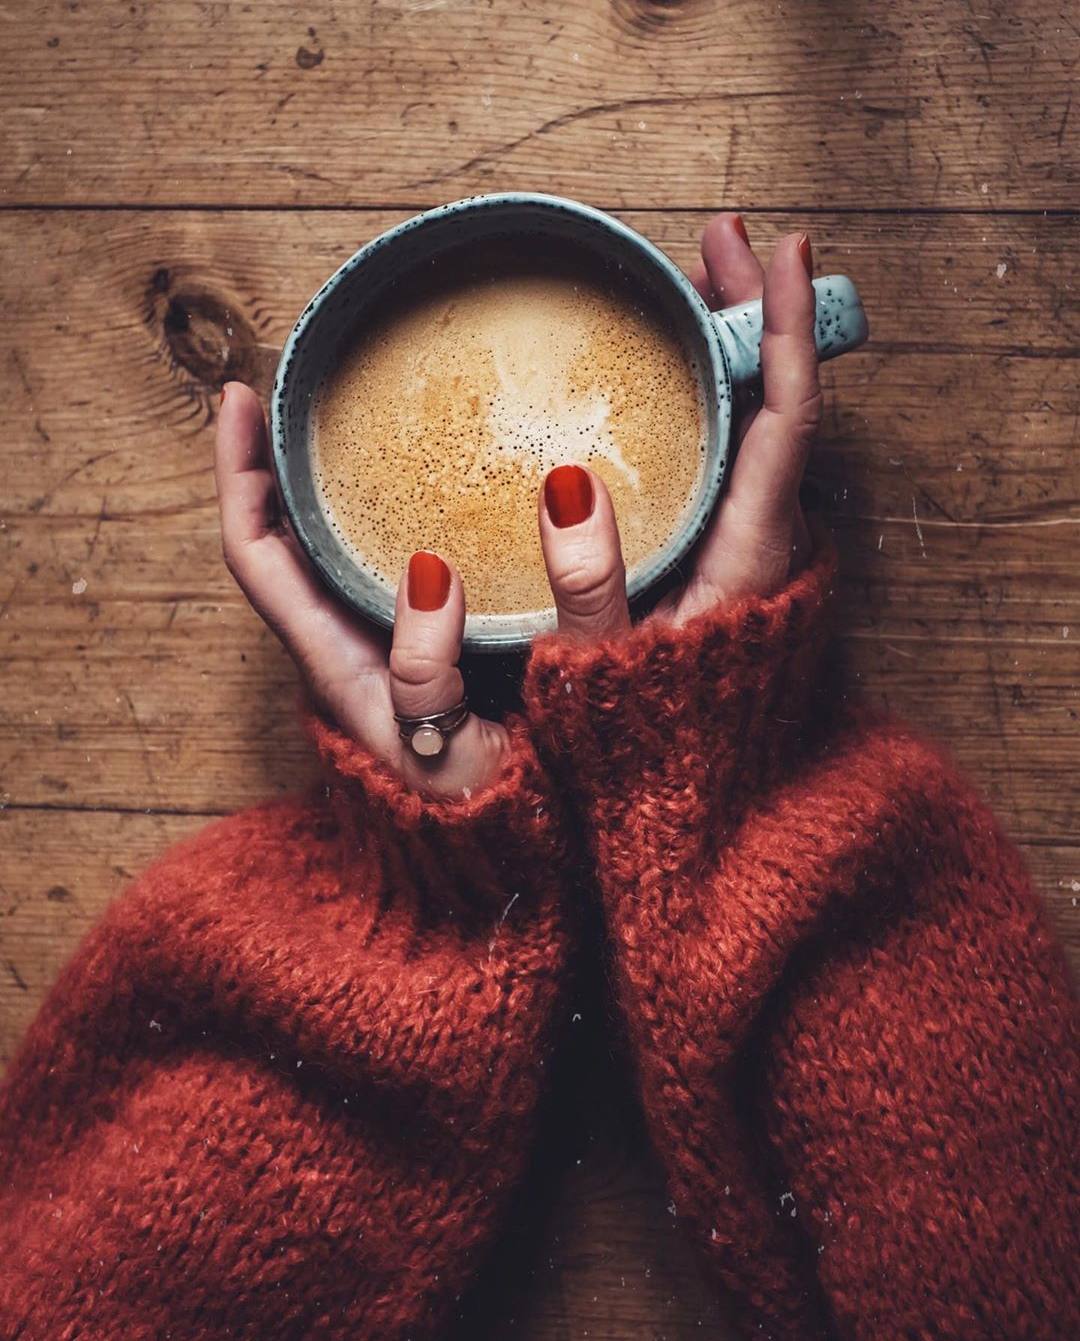 Girls holding Coffee Mug With Red Nail paint